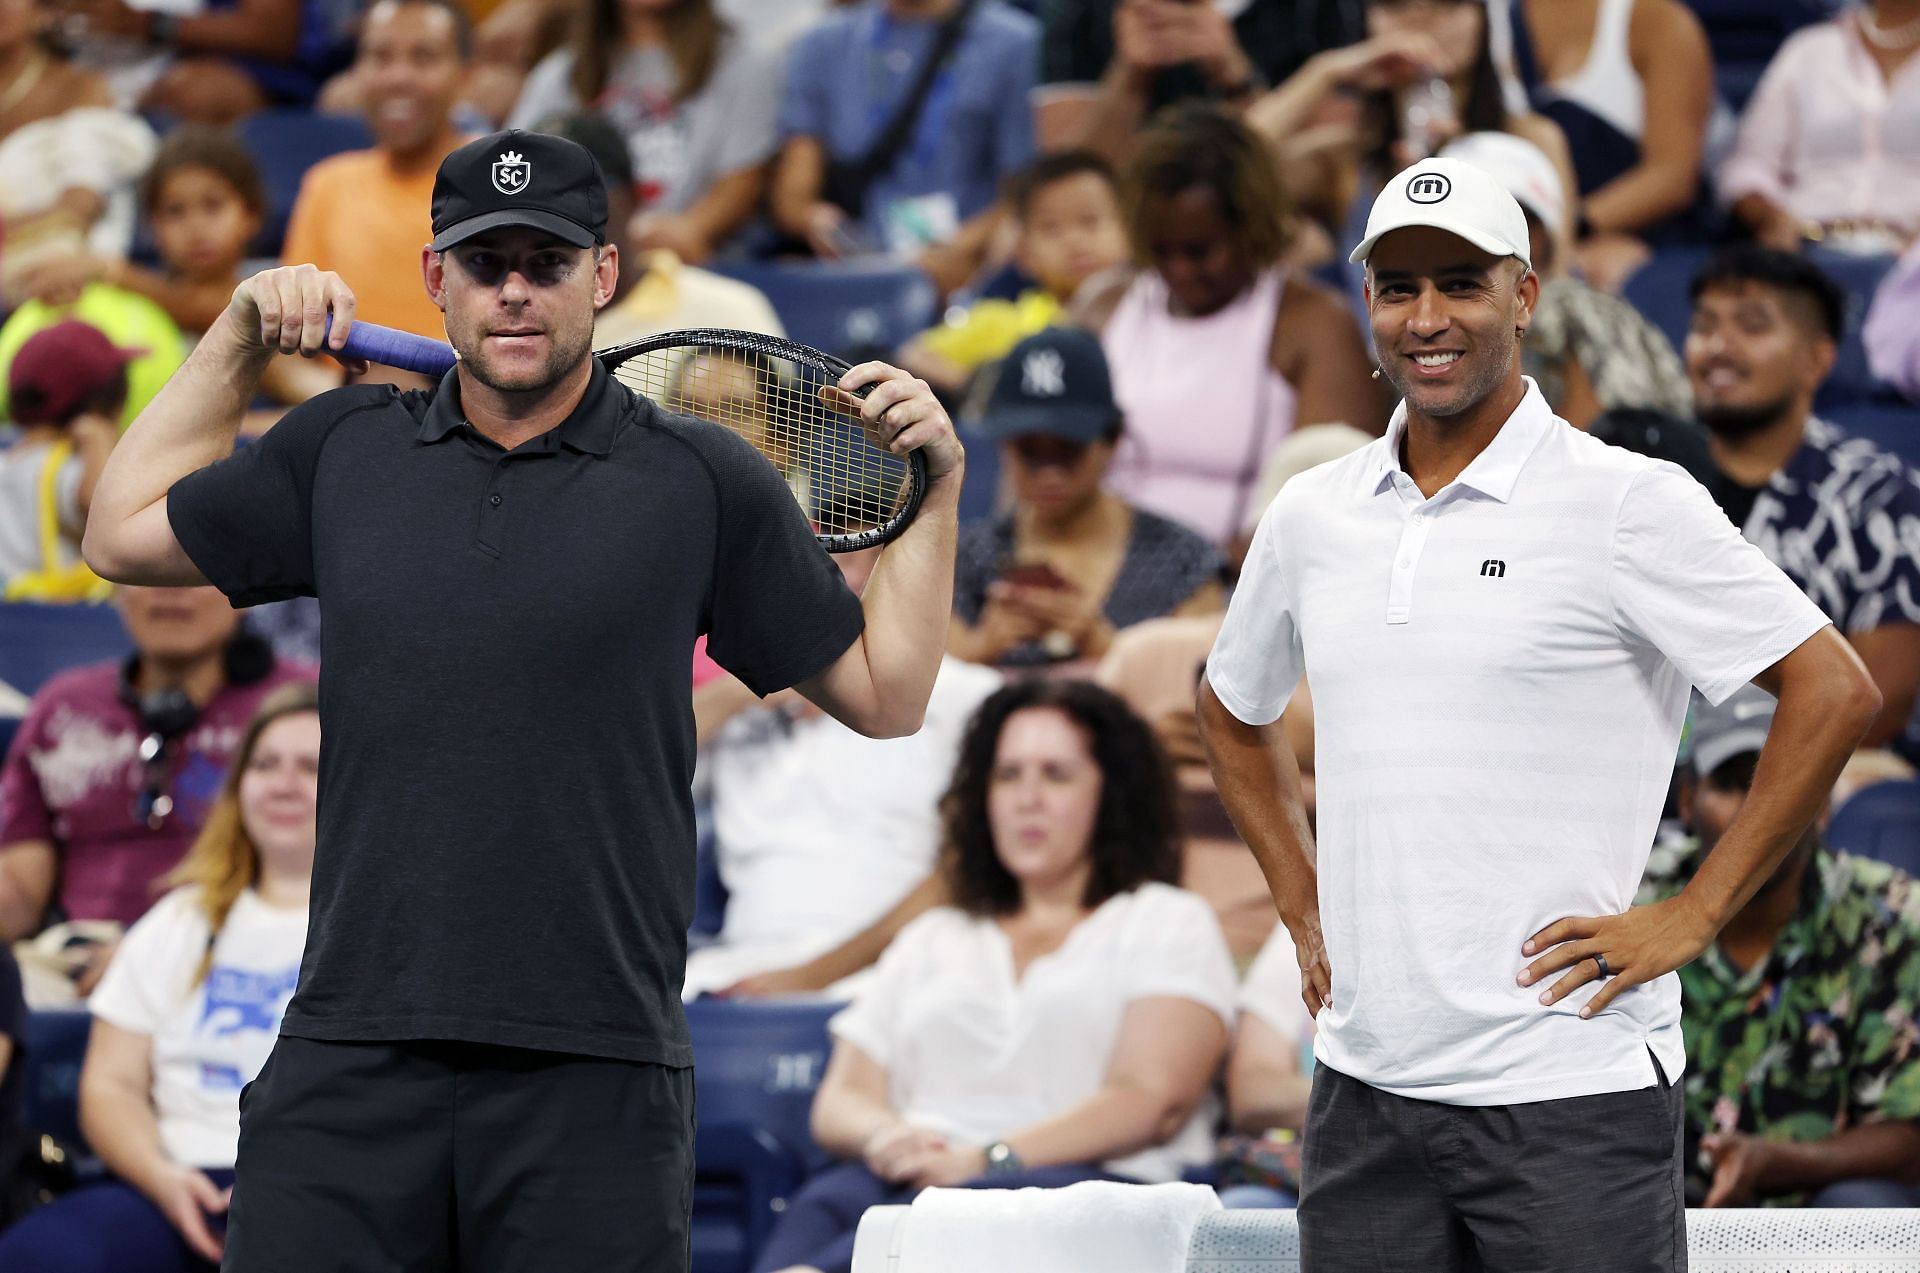 Andy Roddick and James Blake watch Kim Clijsters and Bethanie Mattek-Sands play during the US Open Legends Match at the 2022 US Open 